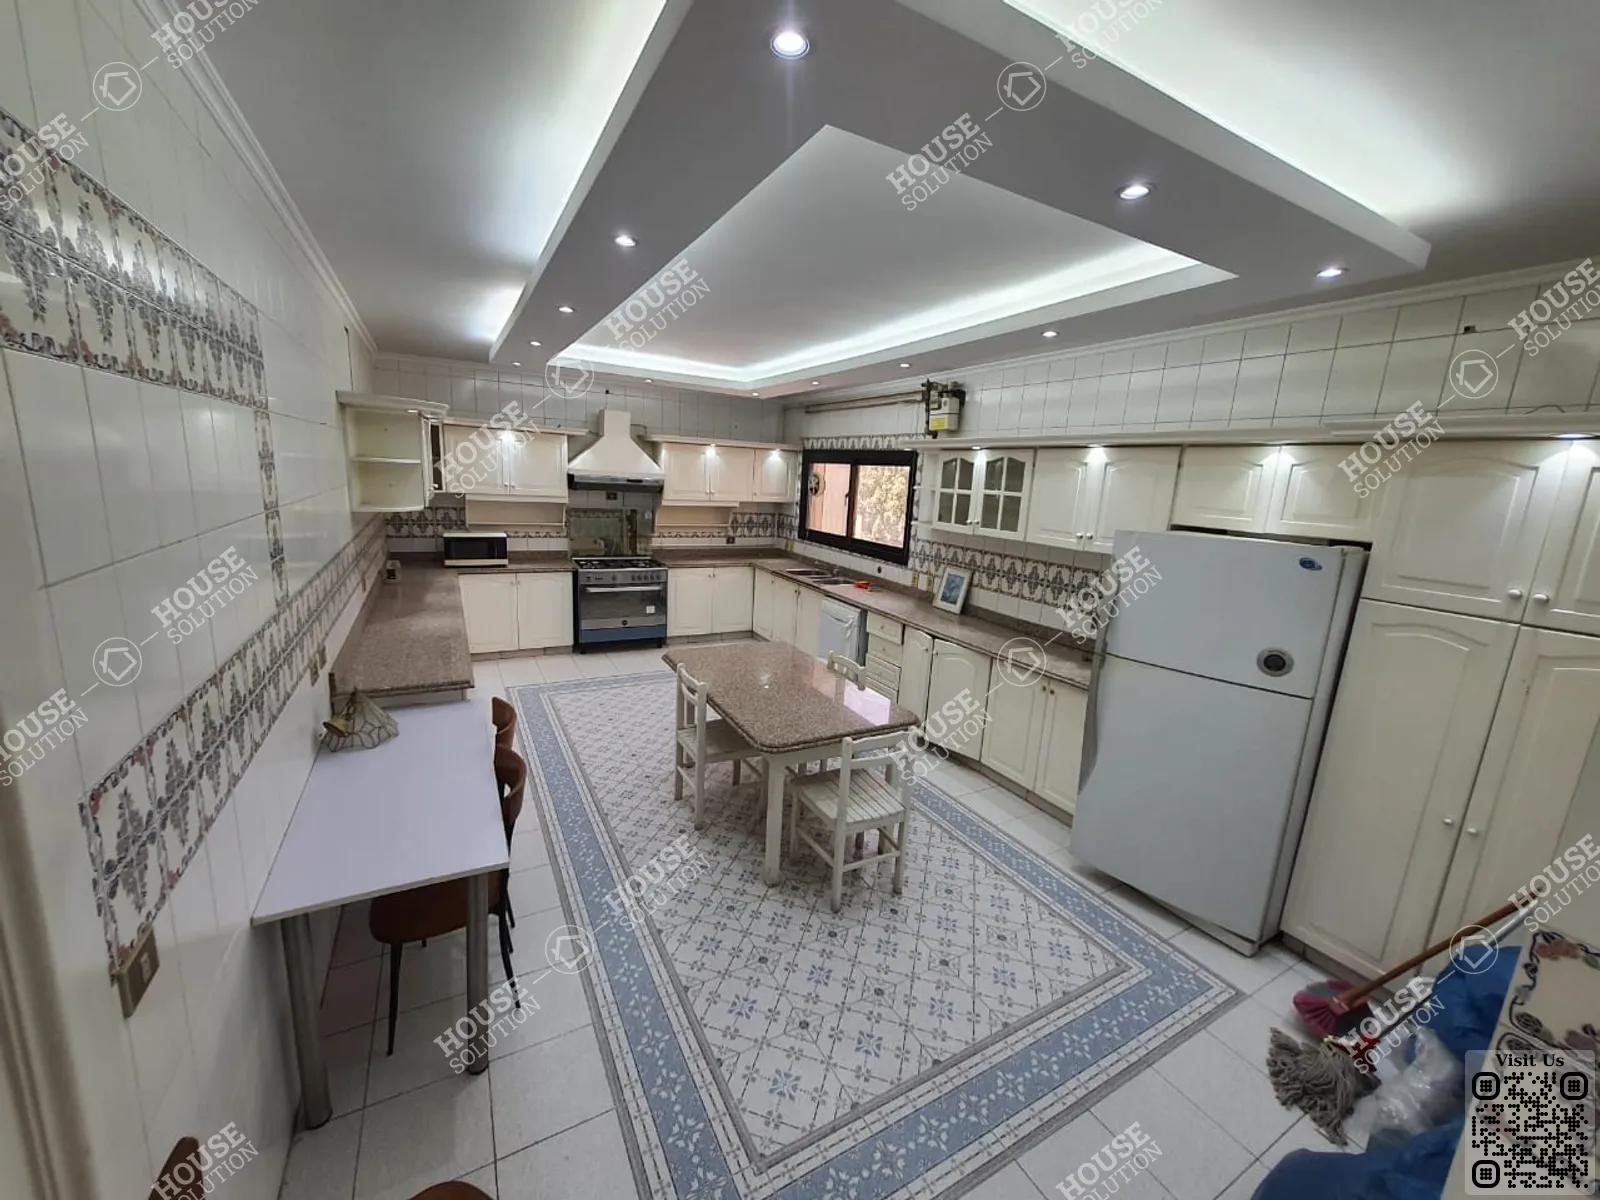 KITCHEN  @ Apartments For Rent In Maadi Maadi Sarayat Area: 320 m² consists of 4 Bedrooms 4 Bathrooms Modern furnished 5 stars #5430-1